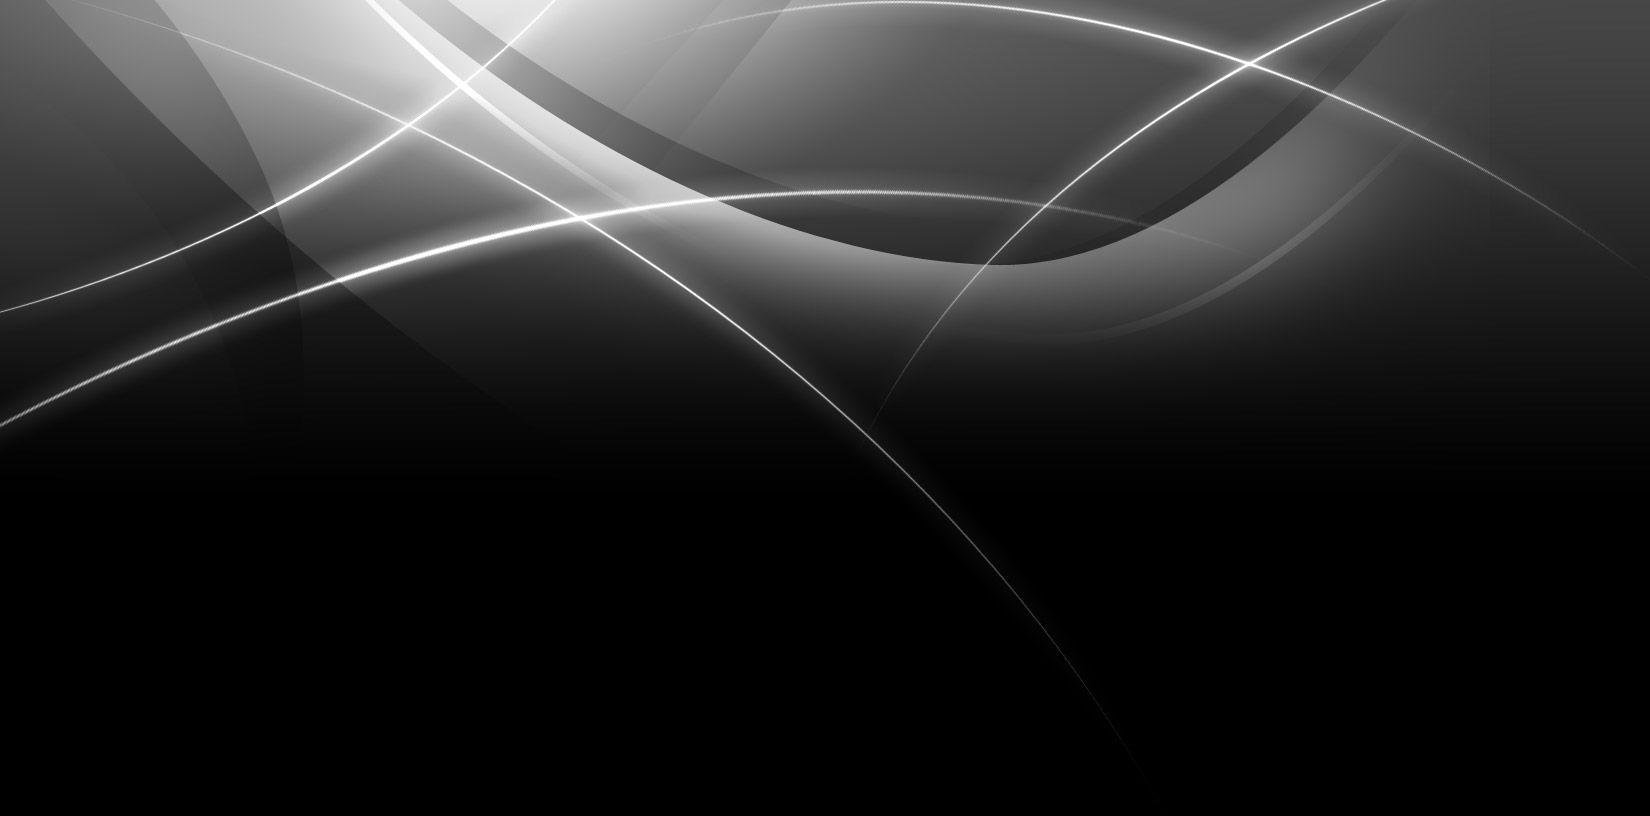 Wallpapers For > Black And White Gradient Backgrounds